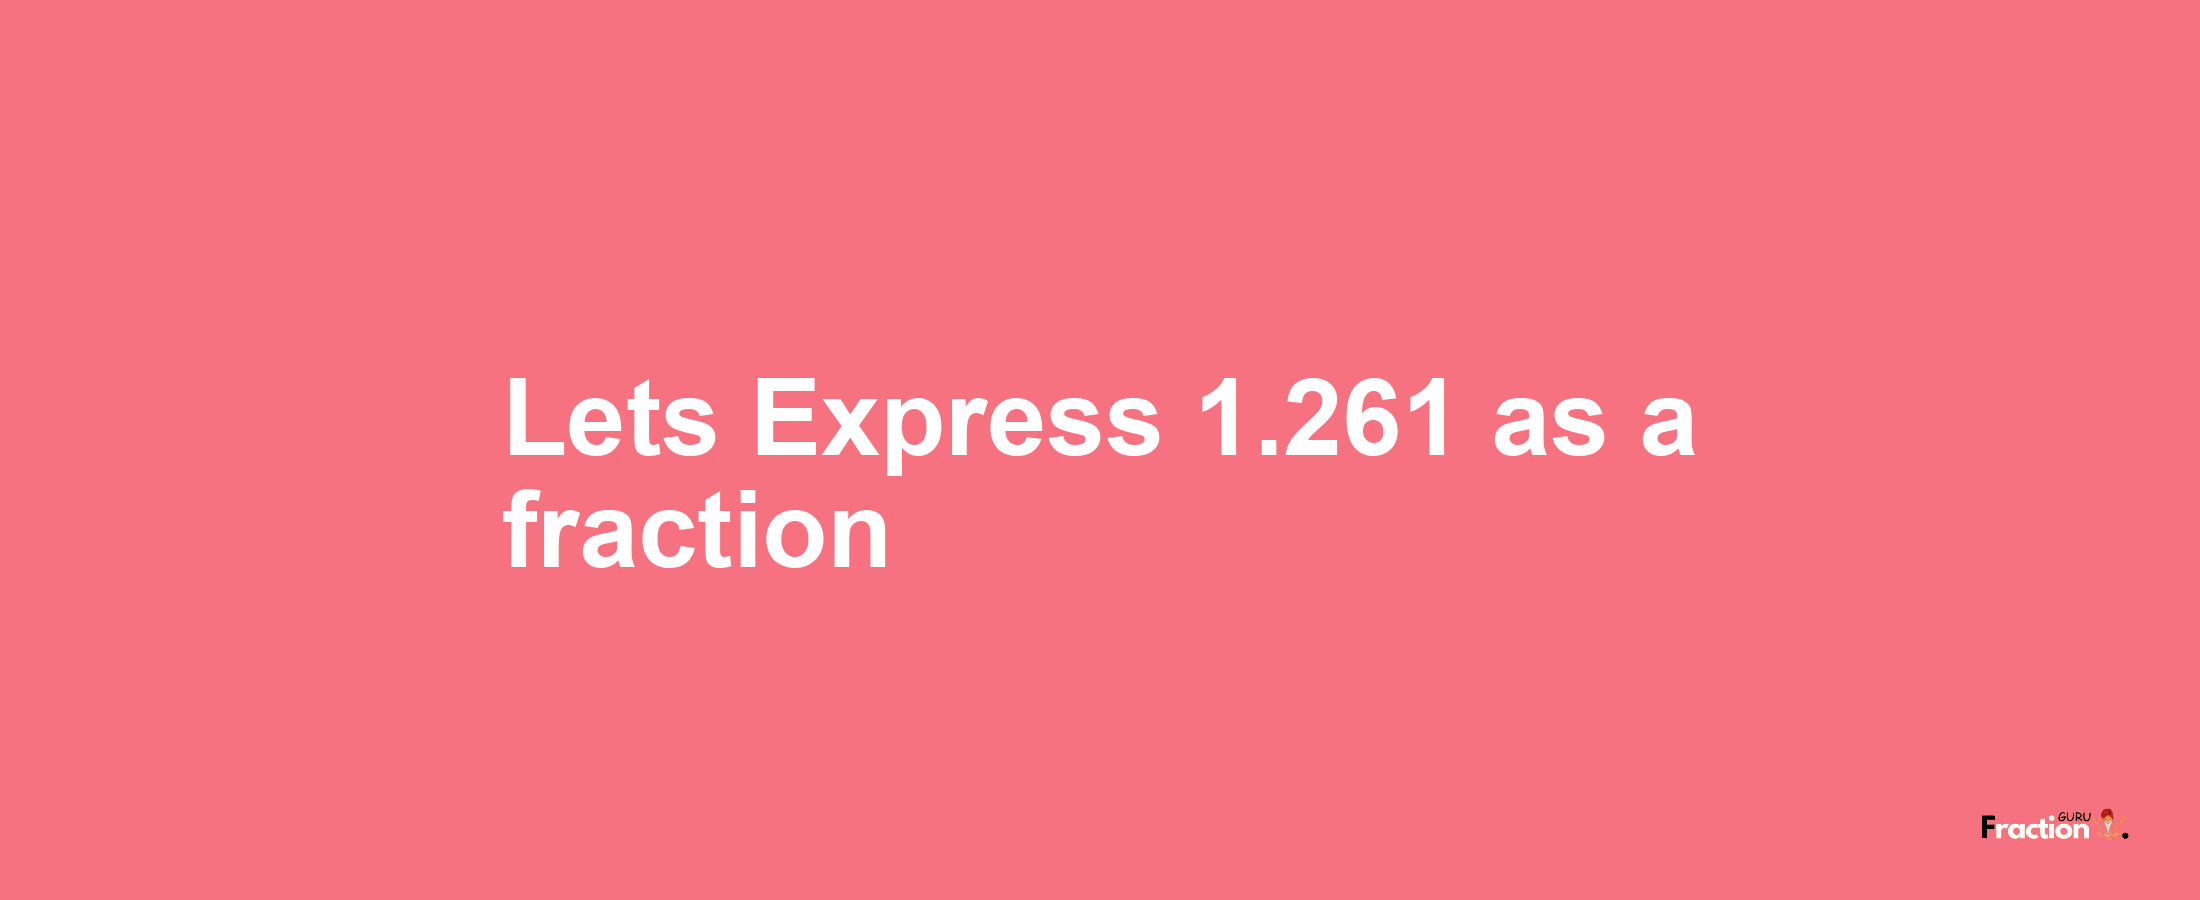 Lets Express 1.261 as afraction